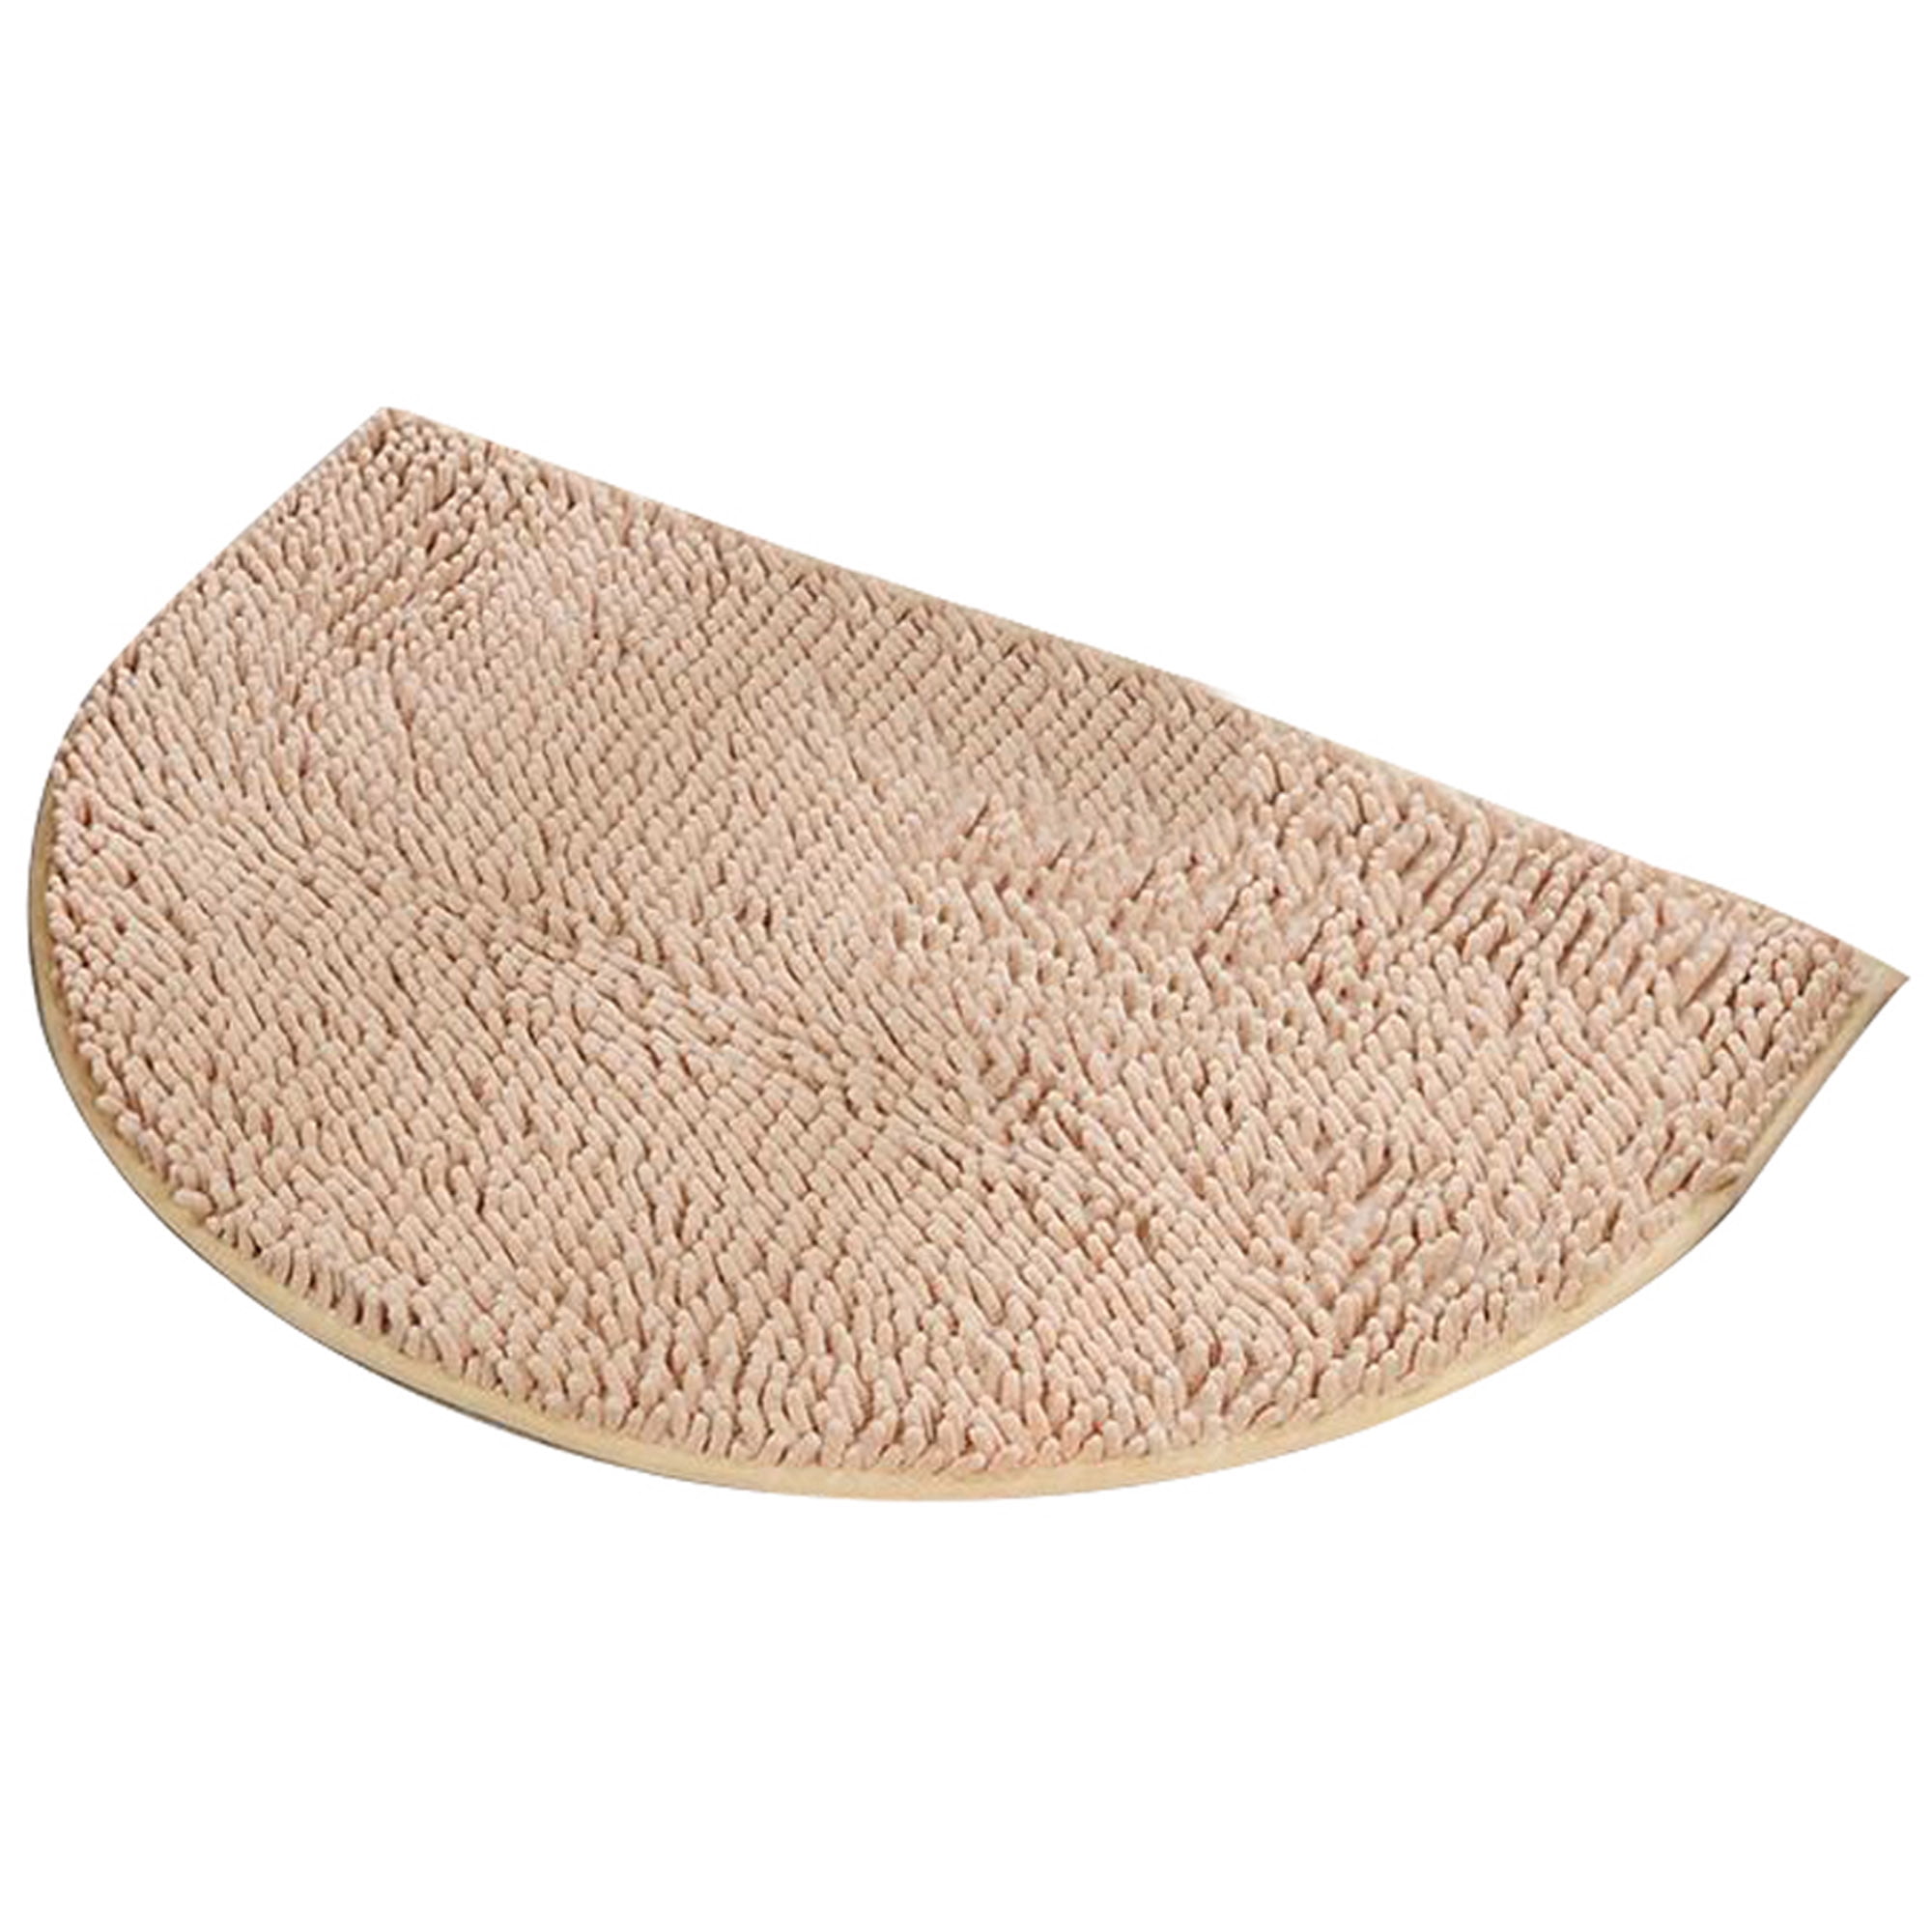 Details about   Round Design Bath Mats Non-Silp Bathroom Carpet Set And Rug,Door Way Rug In The 